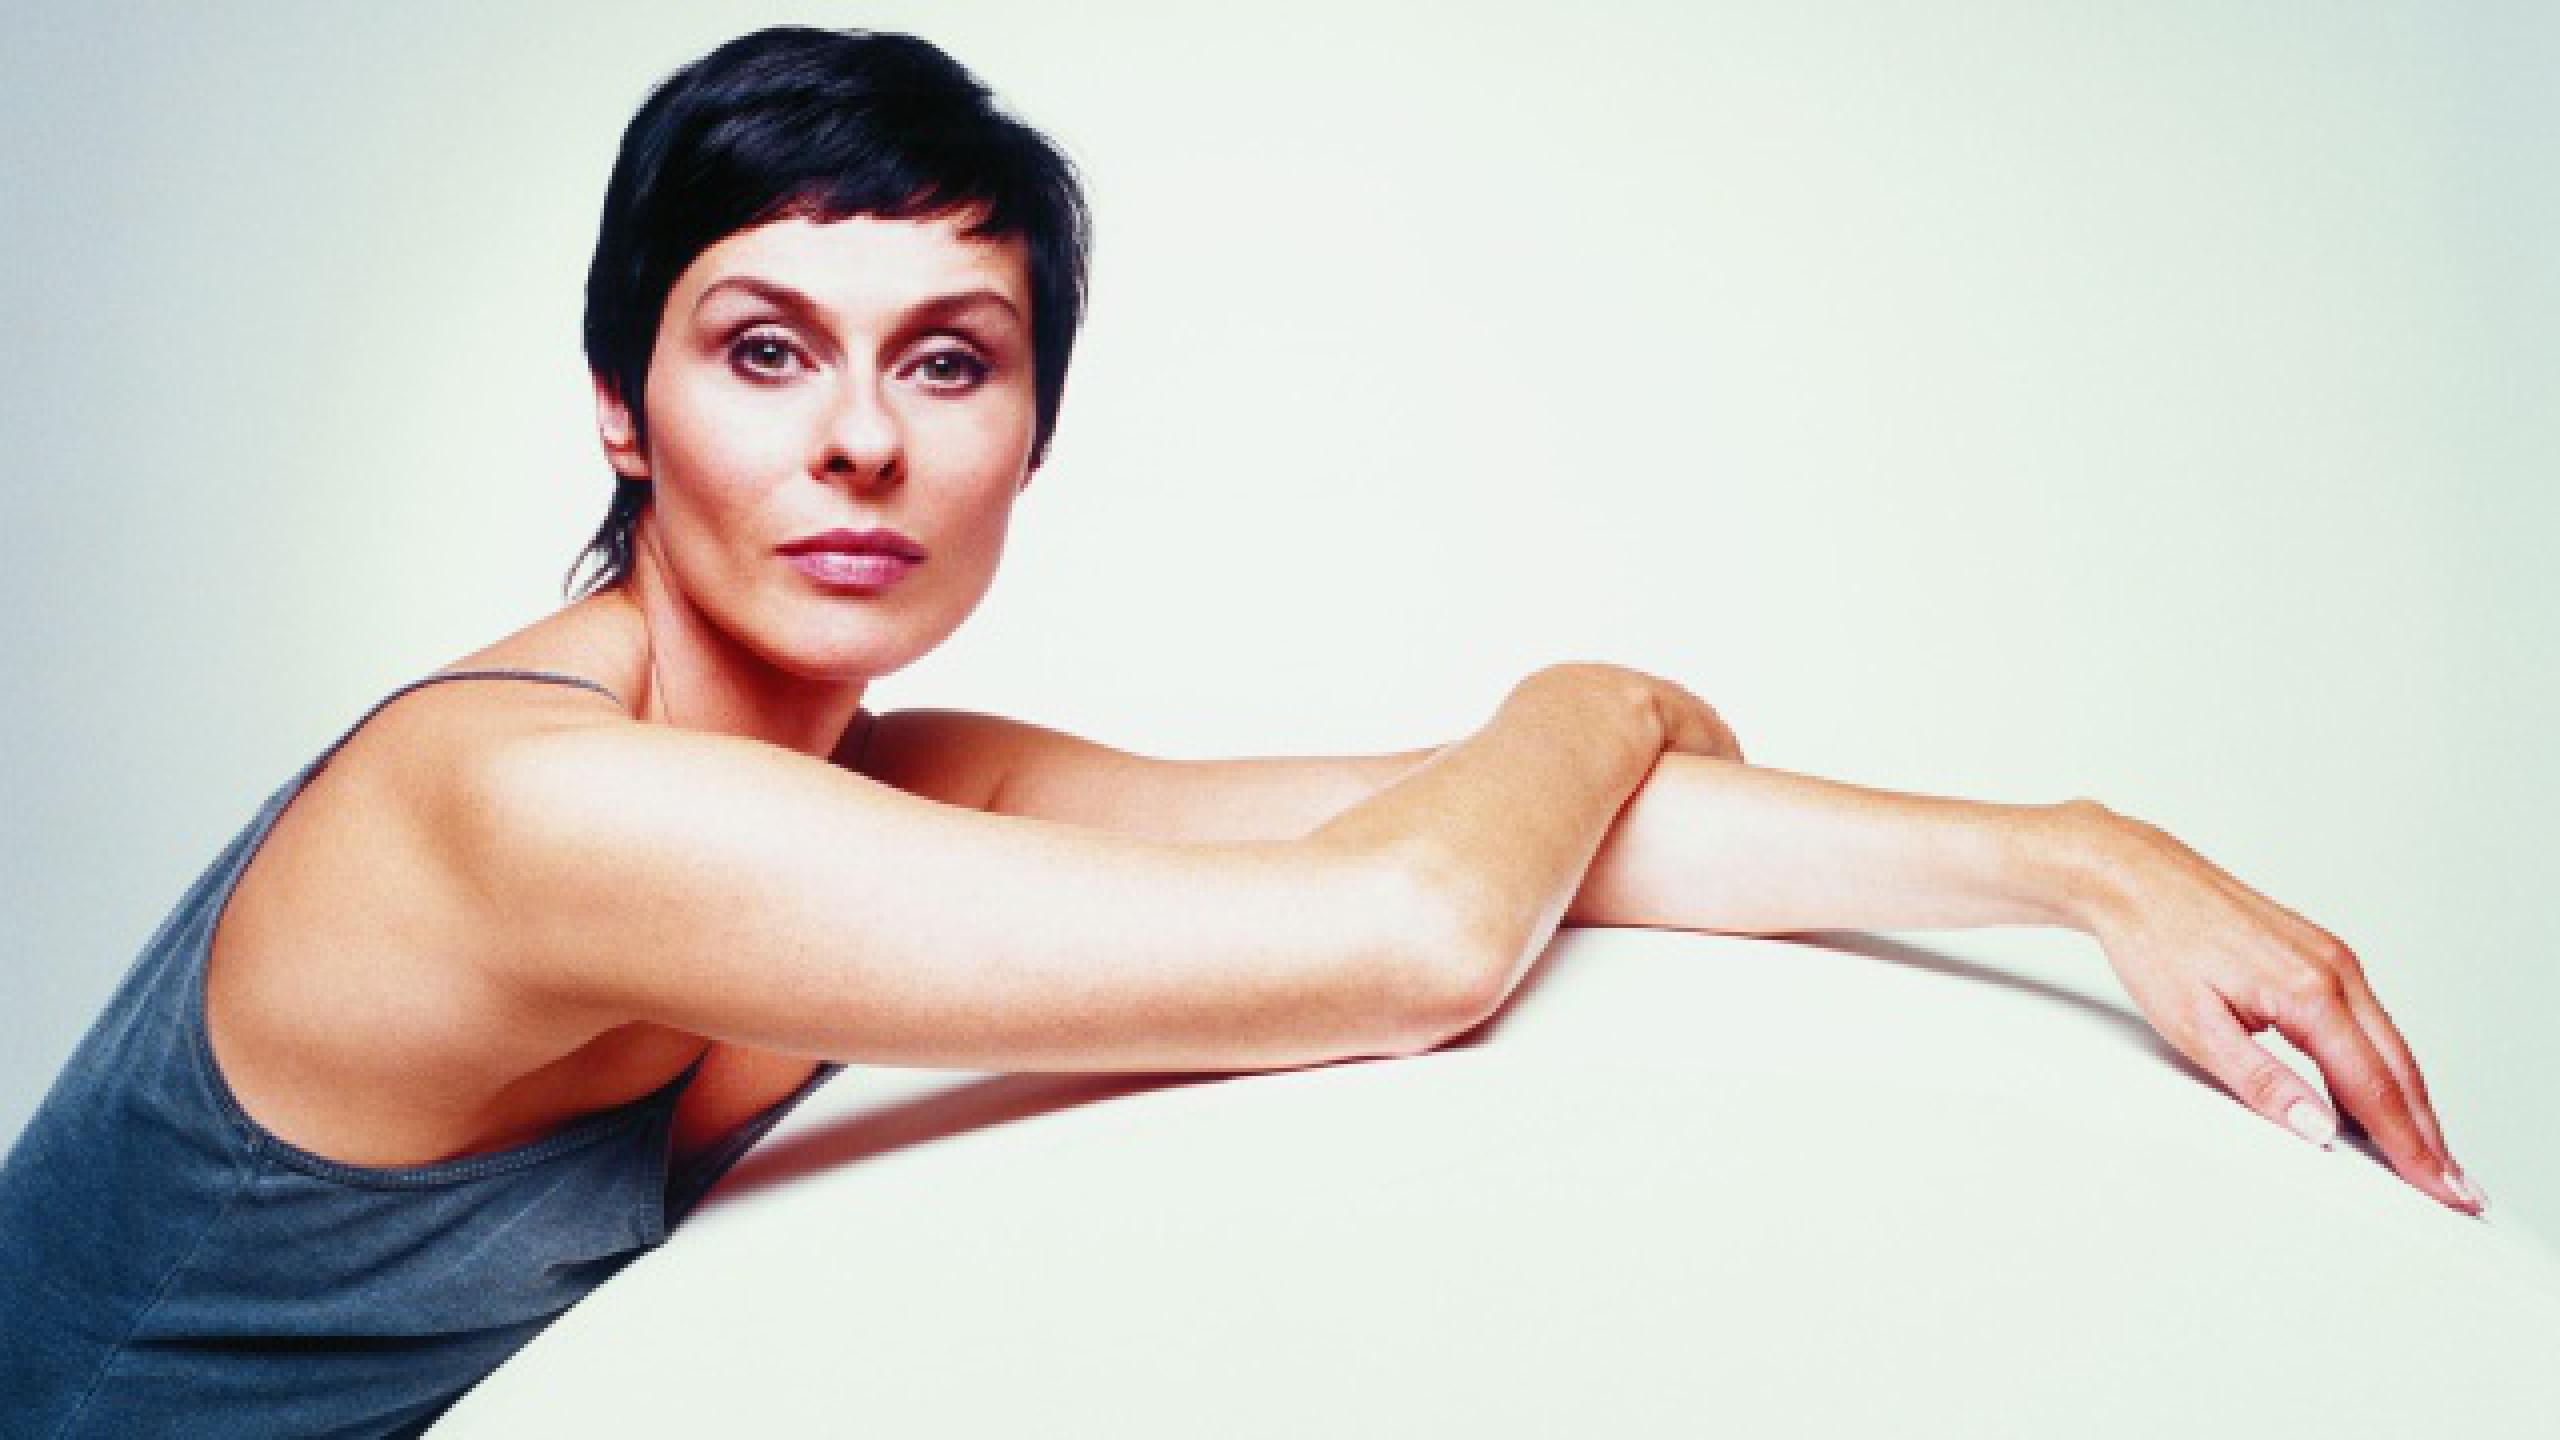 Lisa Stansfield tour dates 2022 2023. Lisa Stansfield tickets and